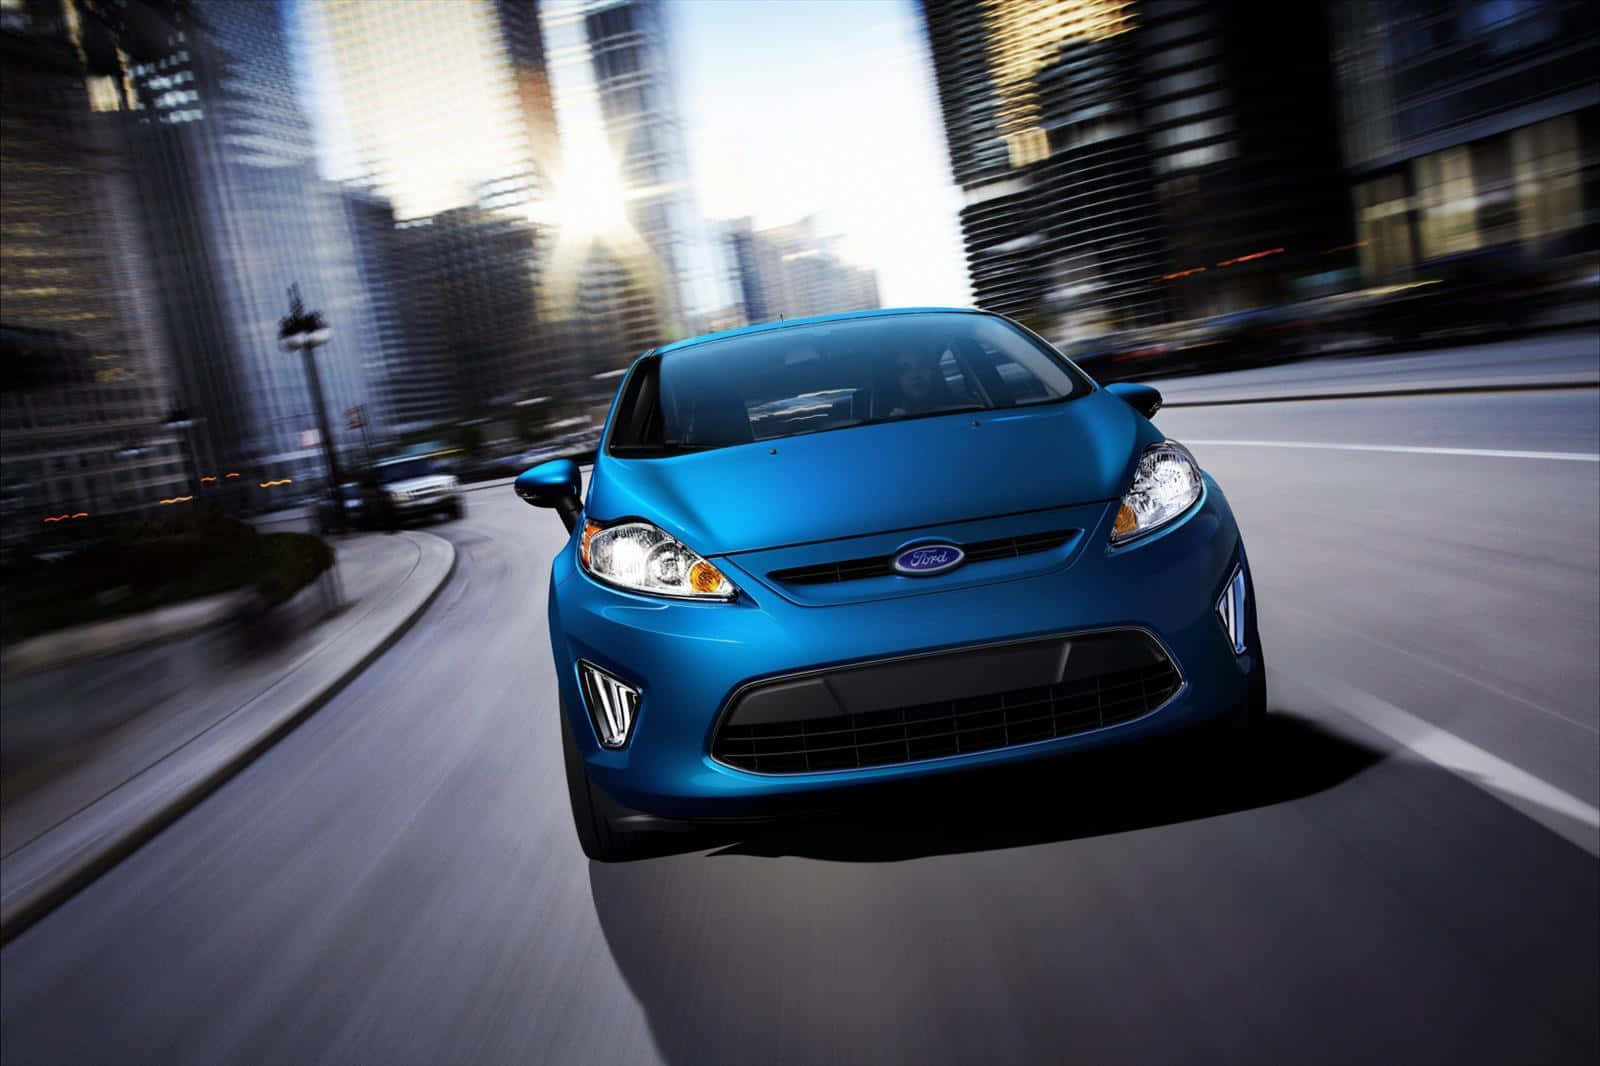 Stunning Ford Fiesta on the road Wallpaper